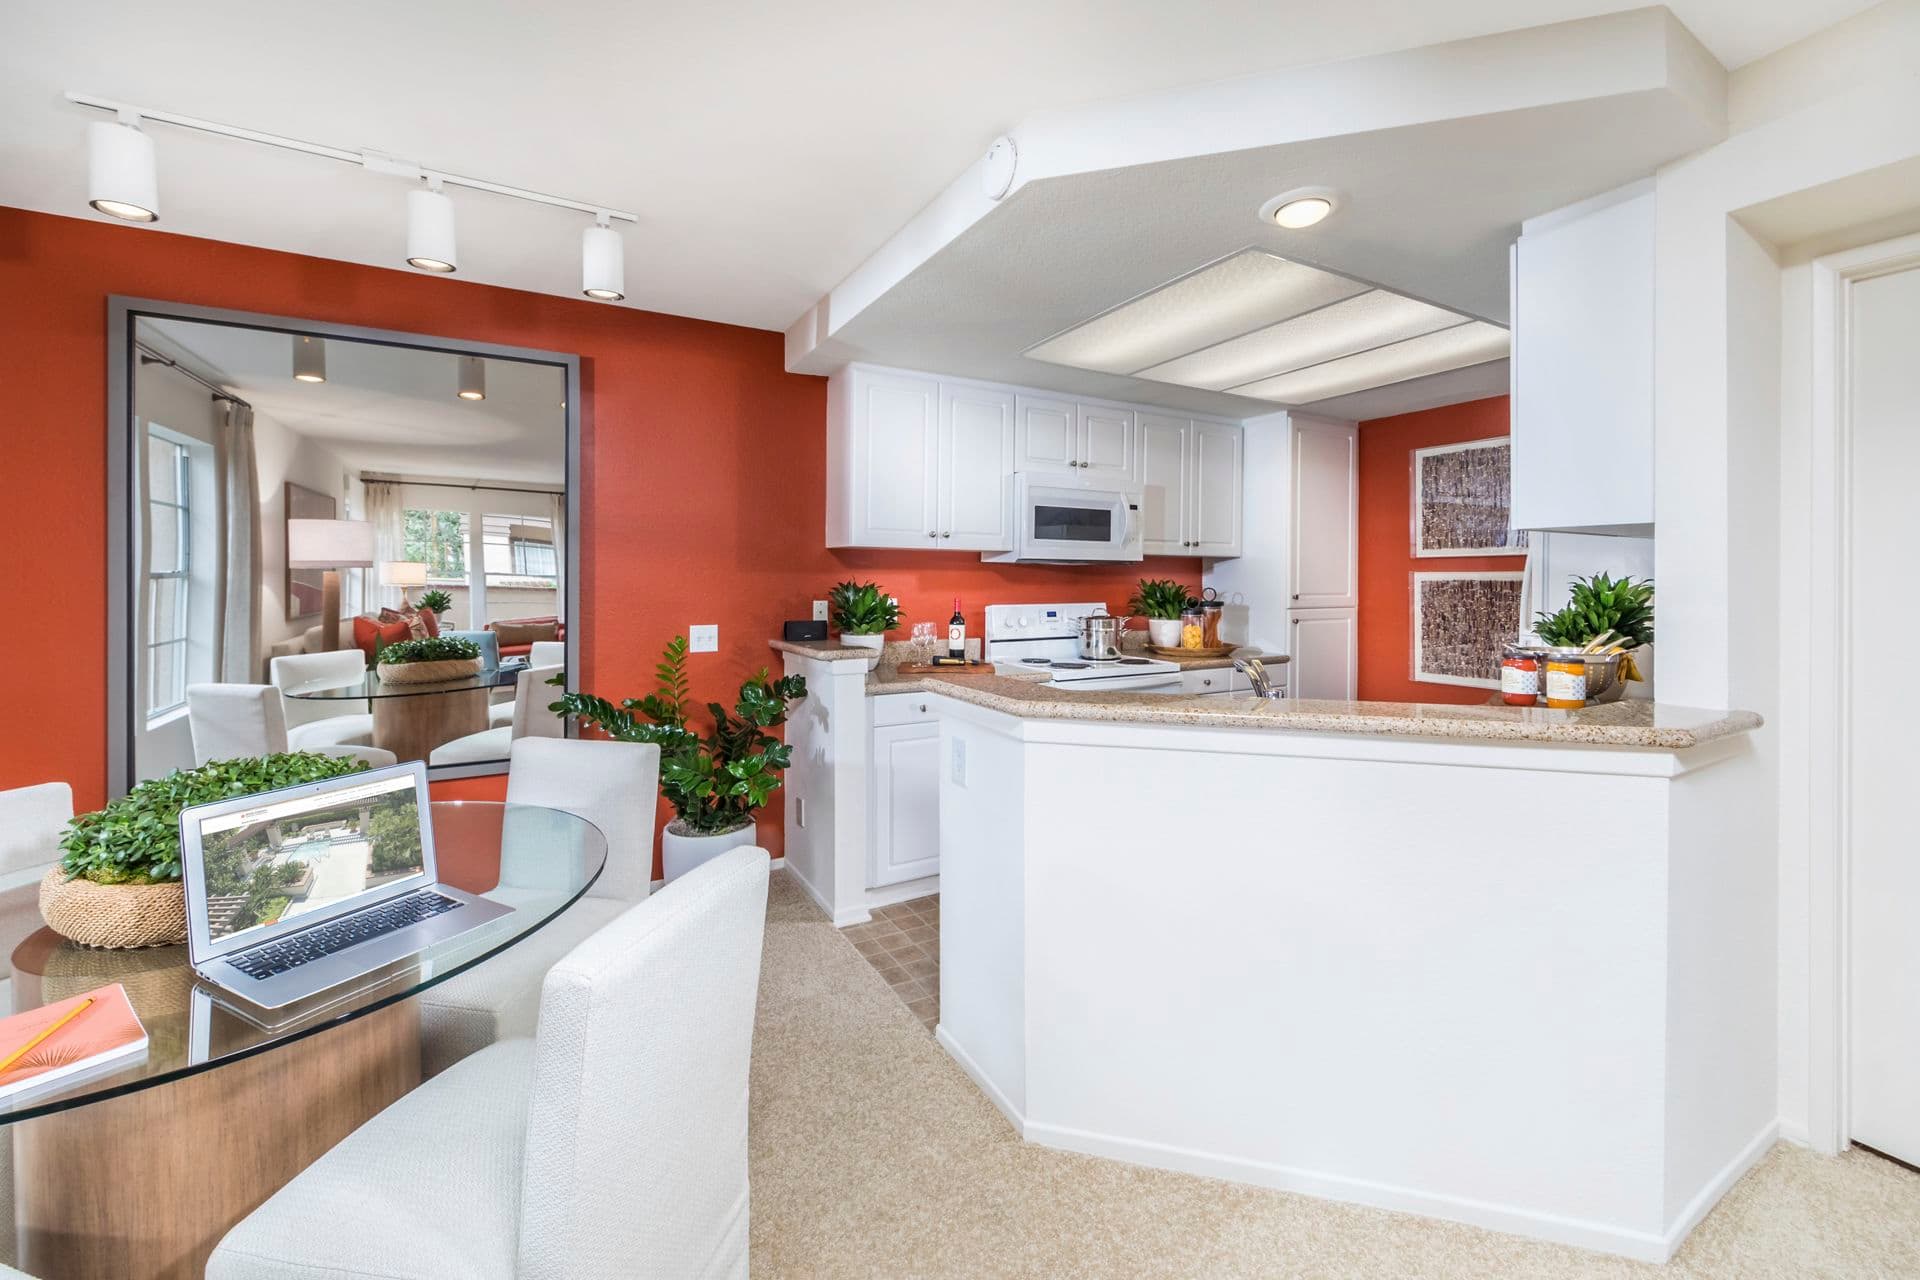 Interior view of kitchen and dining room at Rancho Maderas Apartment Homes in Tustin, CA.